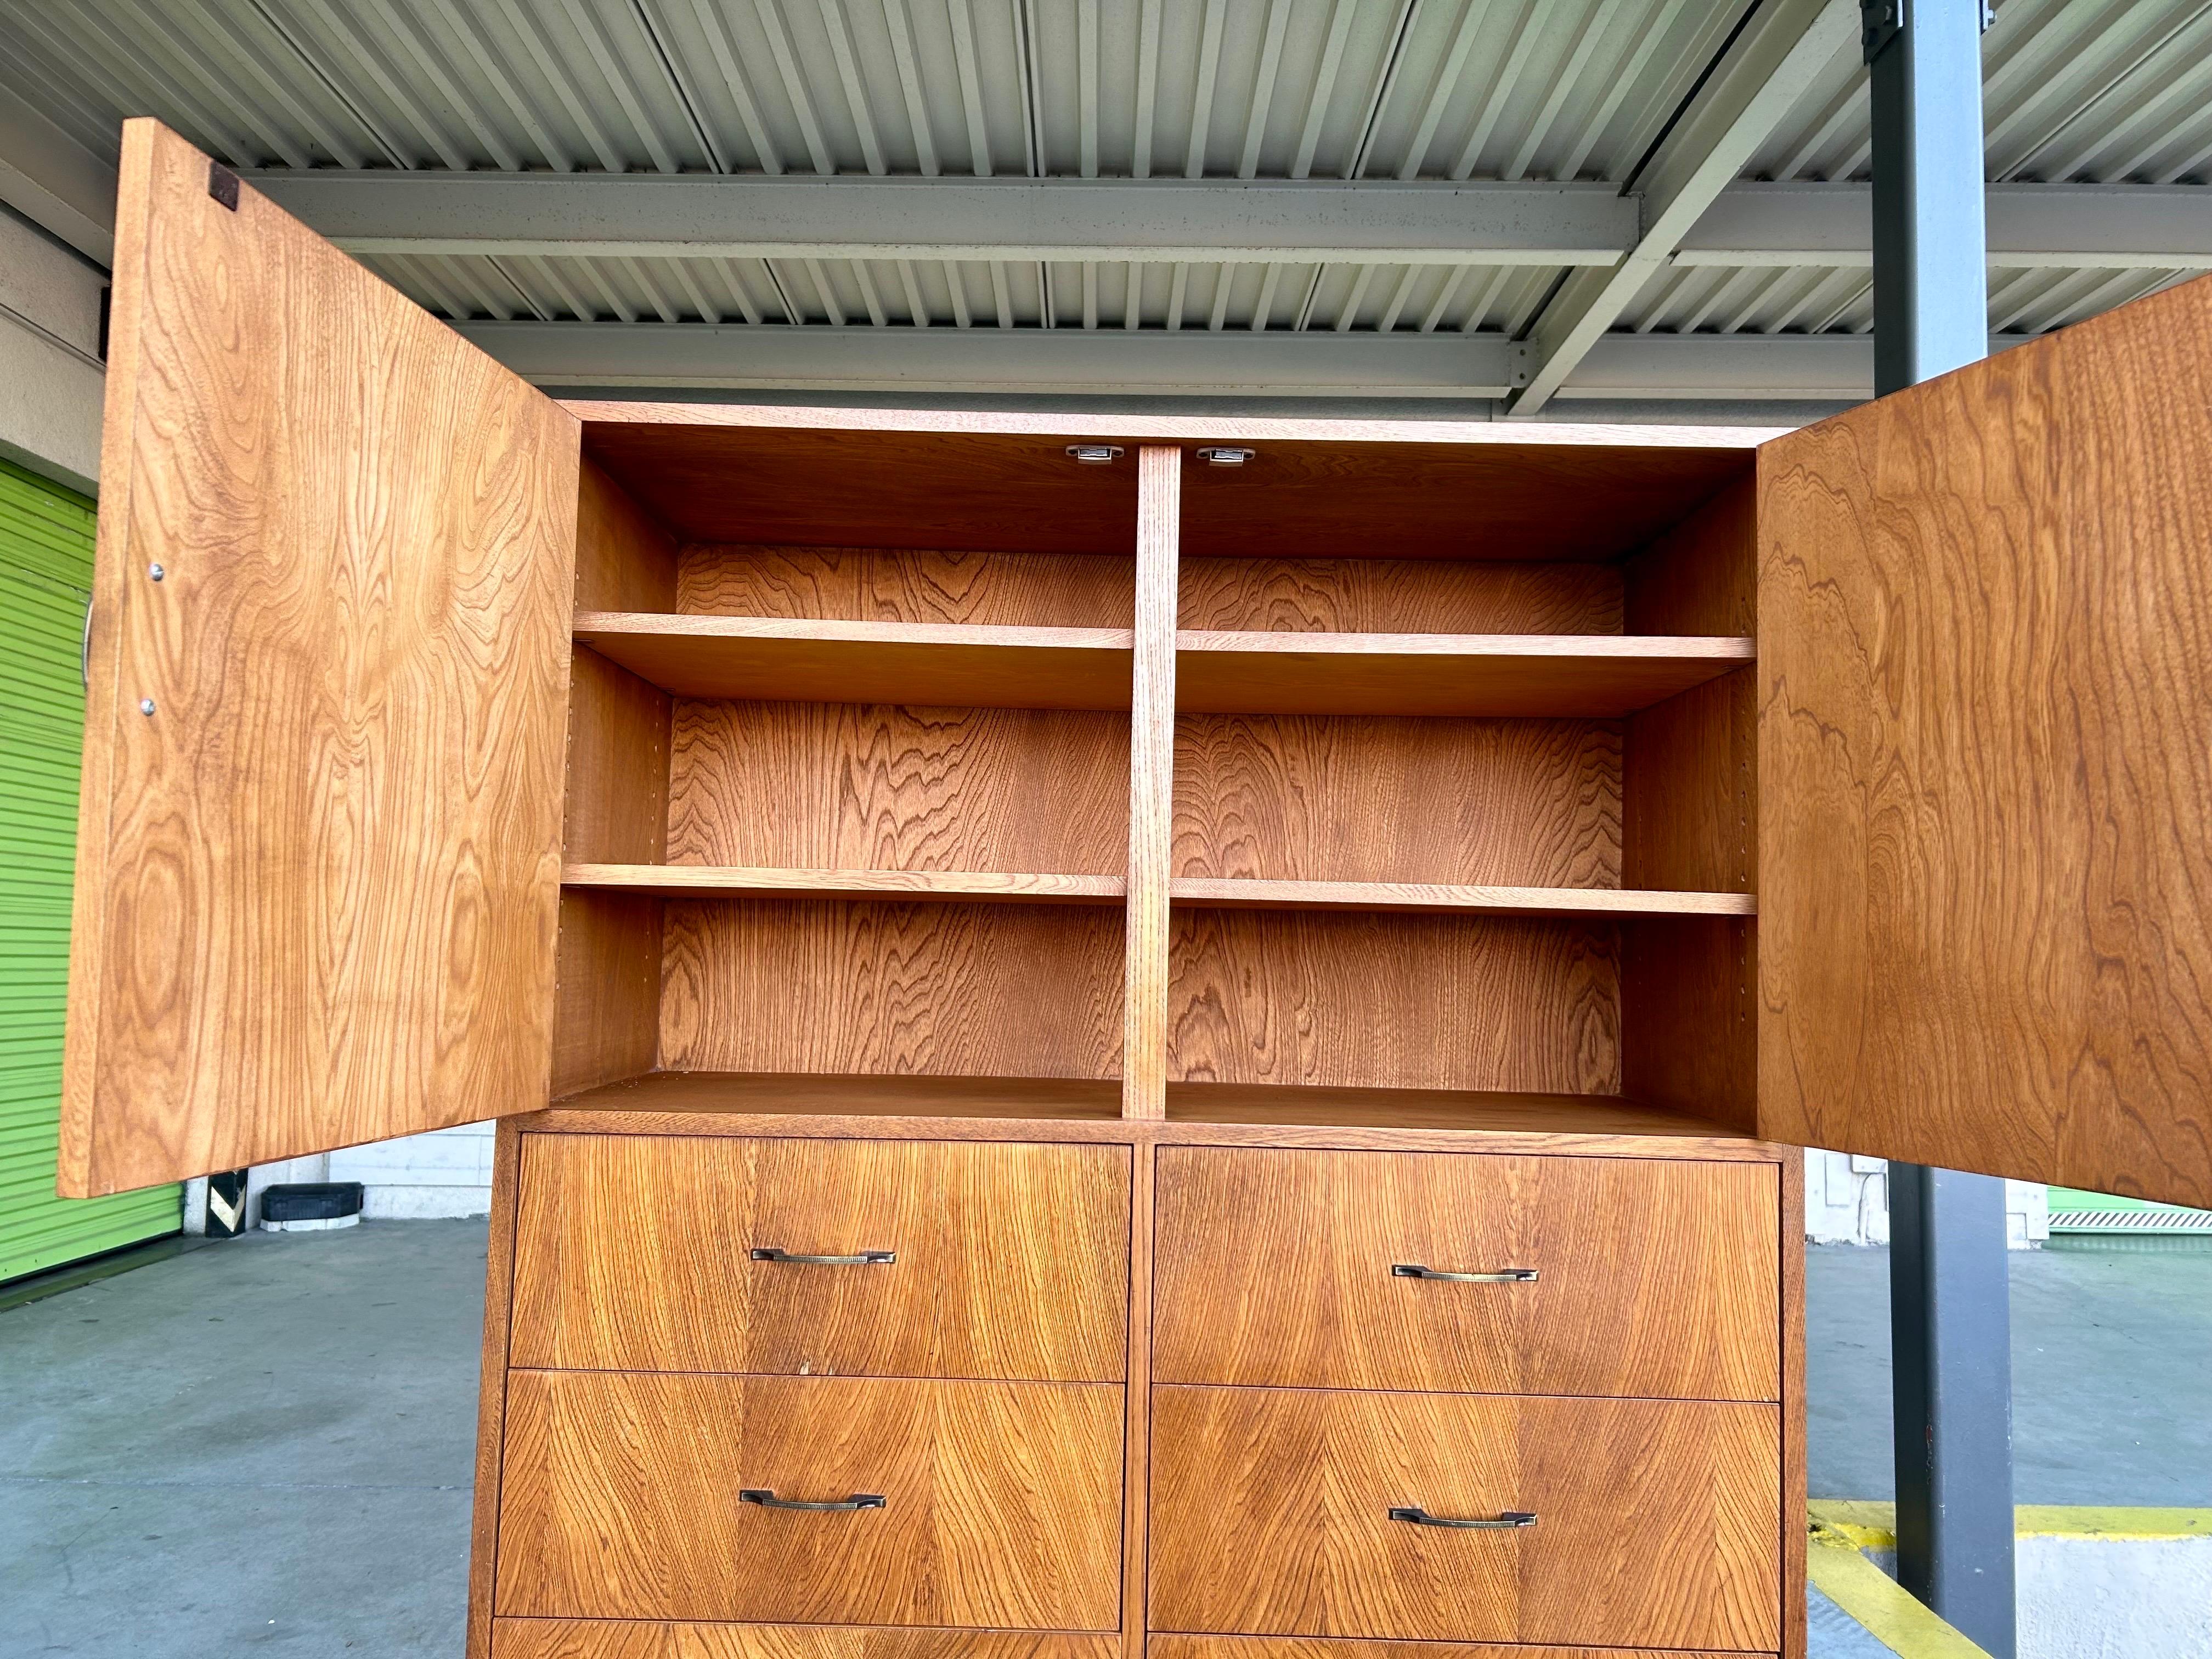 Rare and handsome dresser.
Danish modern style.
Simple and clean lines.
Architectural form and function.
Plywood (no pressboard) on solid wood base, nice grained keyaki wood veneer, decorative bronze pulls with masonite boards inside the drawers and